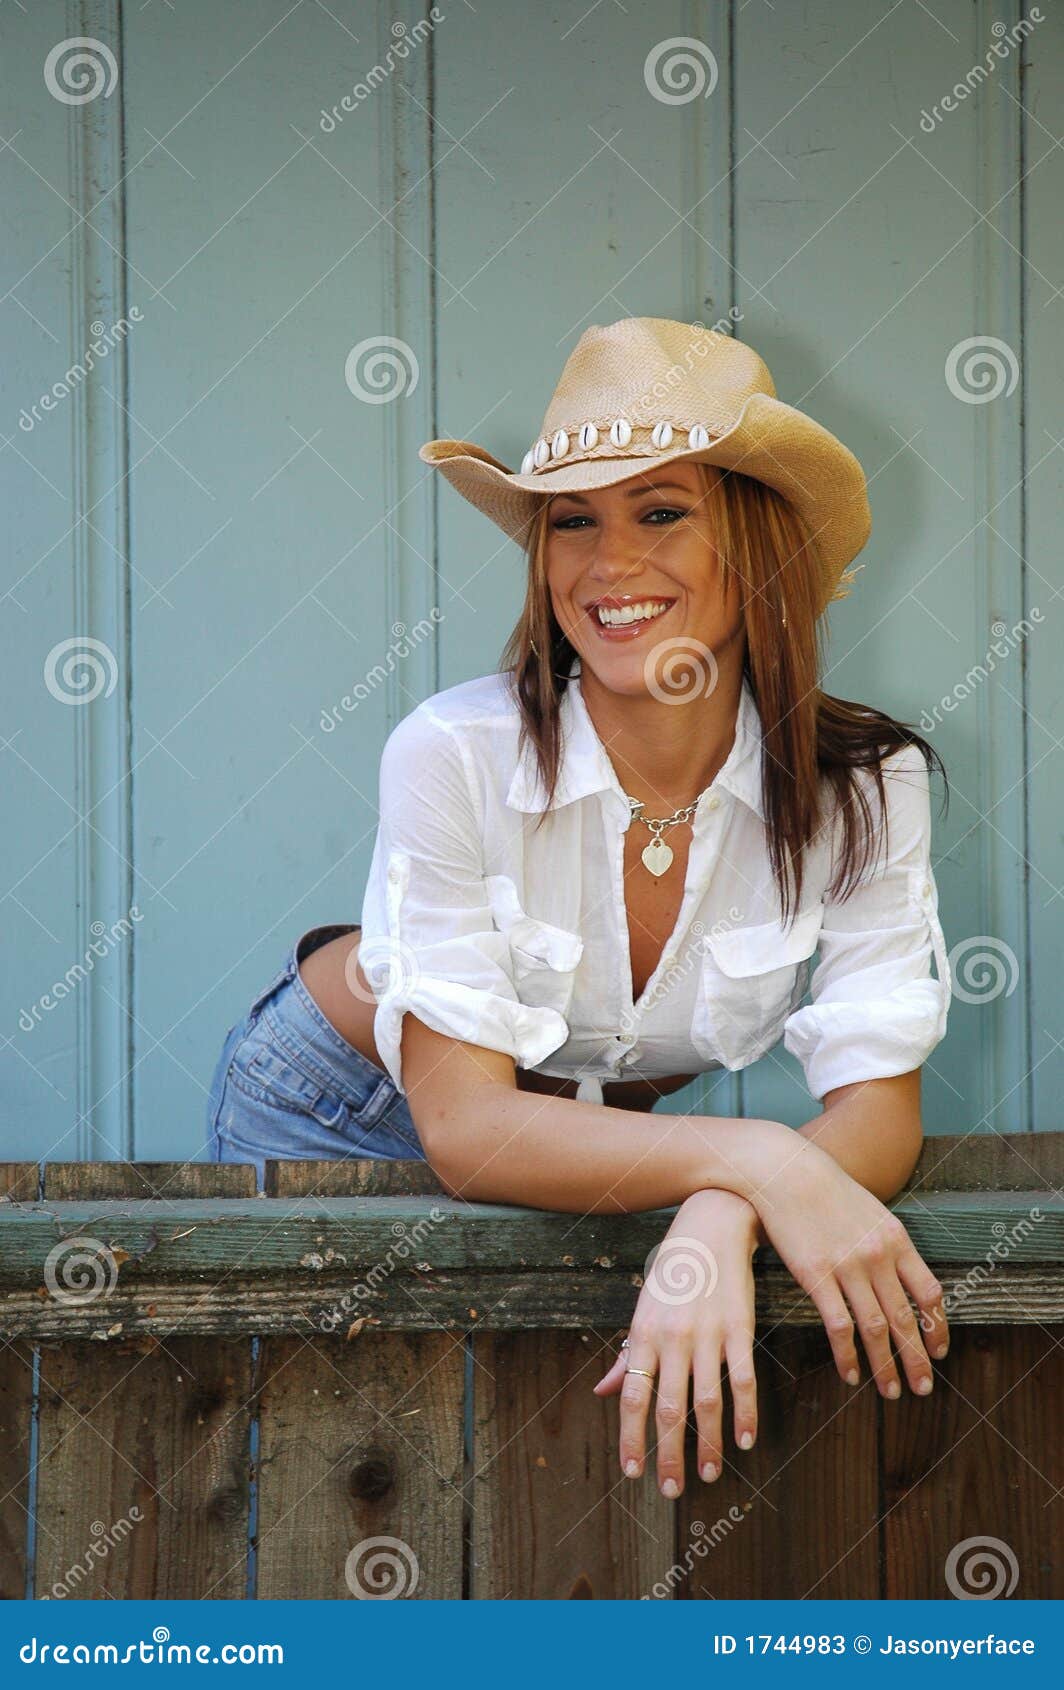 Cowgirl Stock Photos Image 1744983